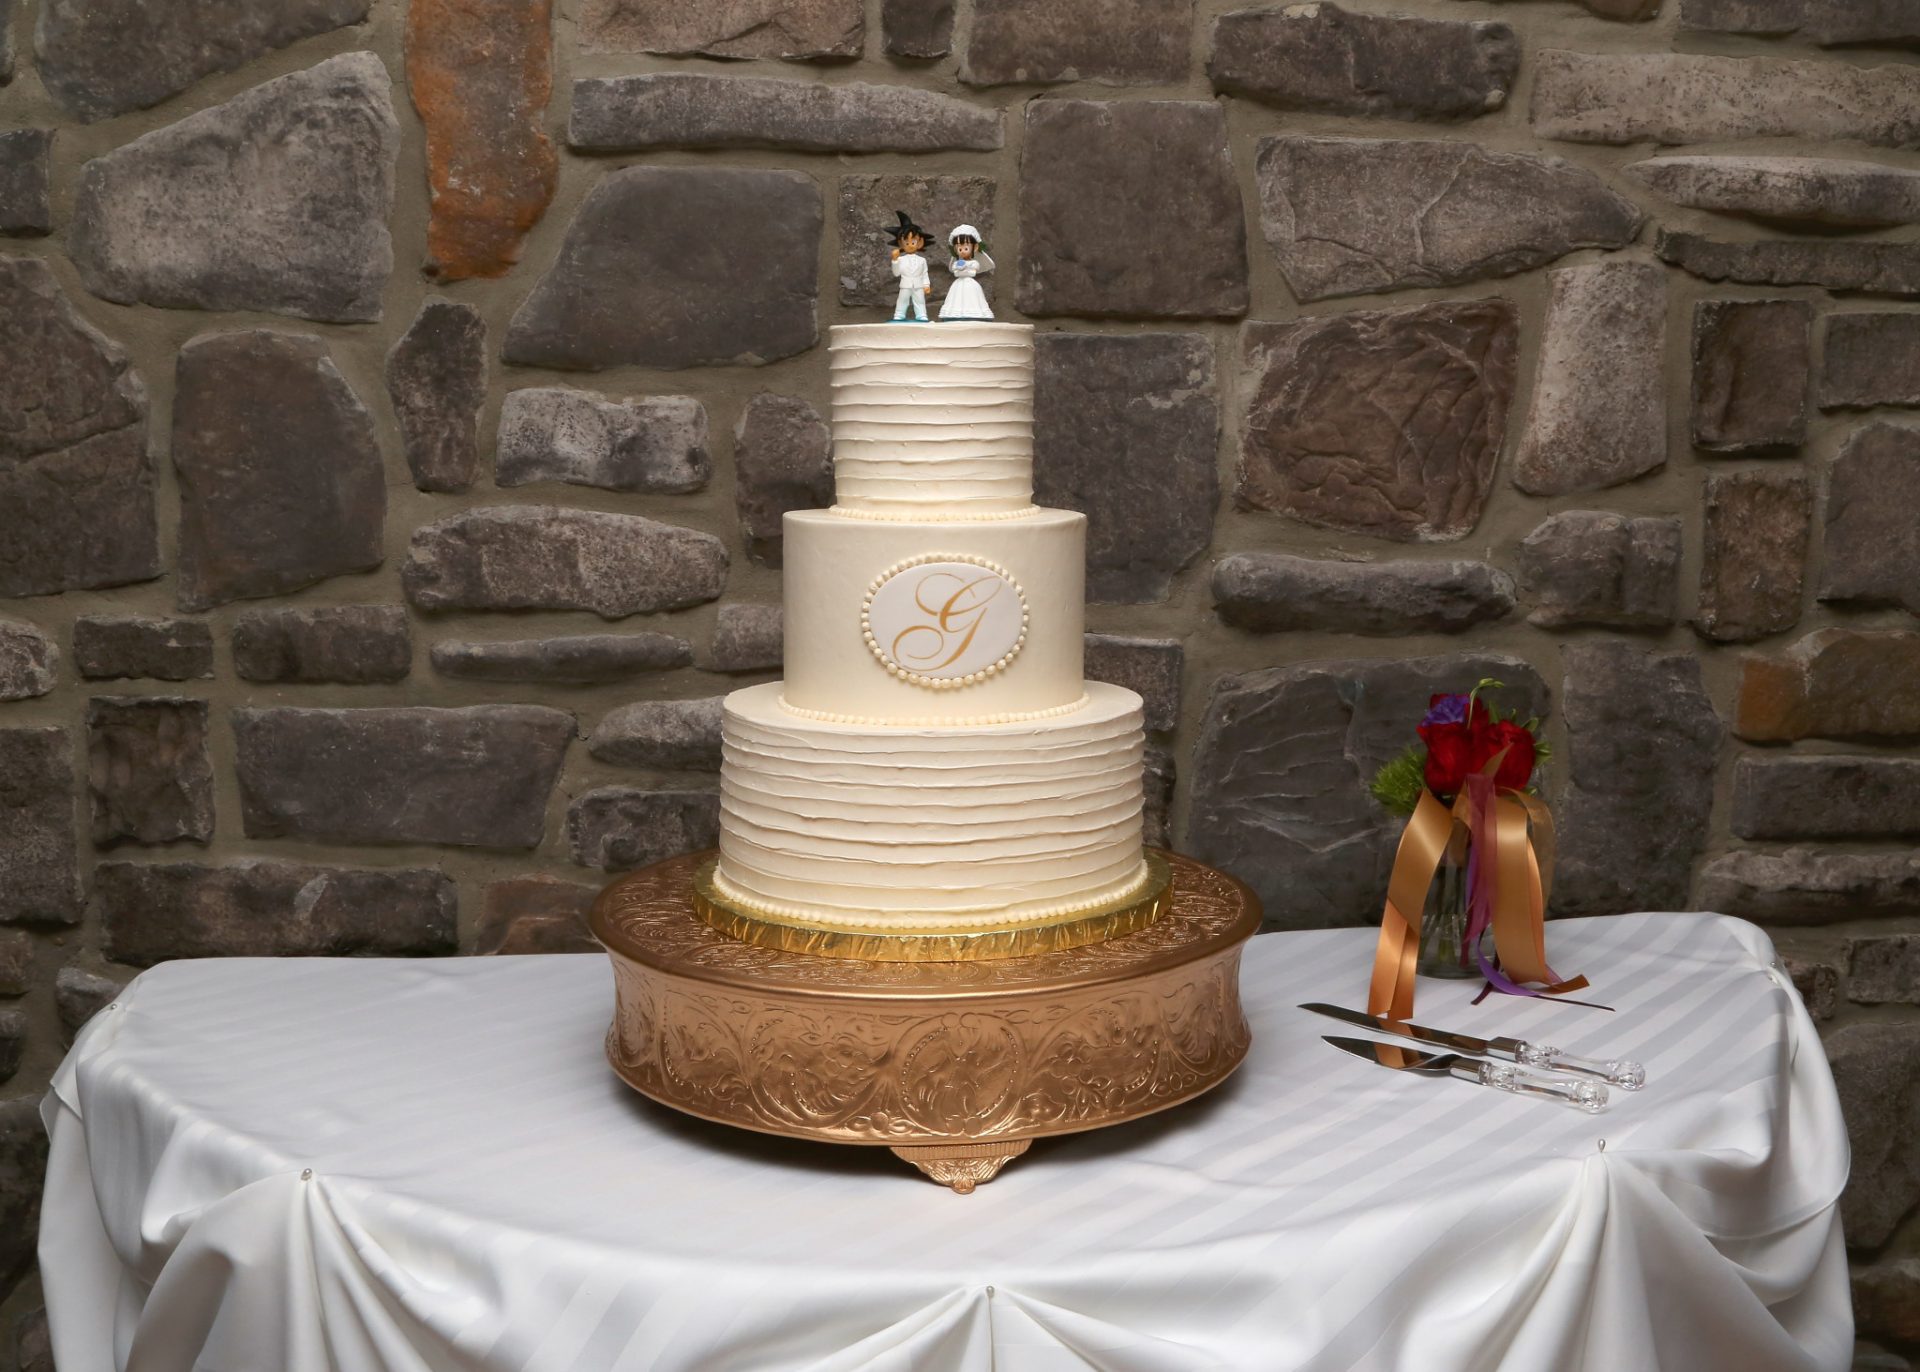 Wedding cake with gold cake stand